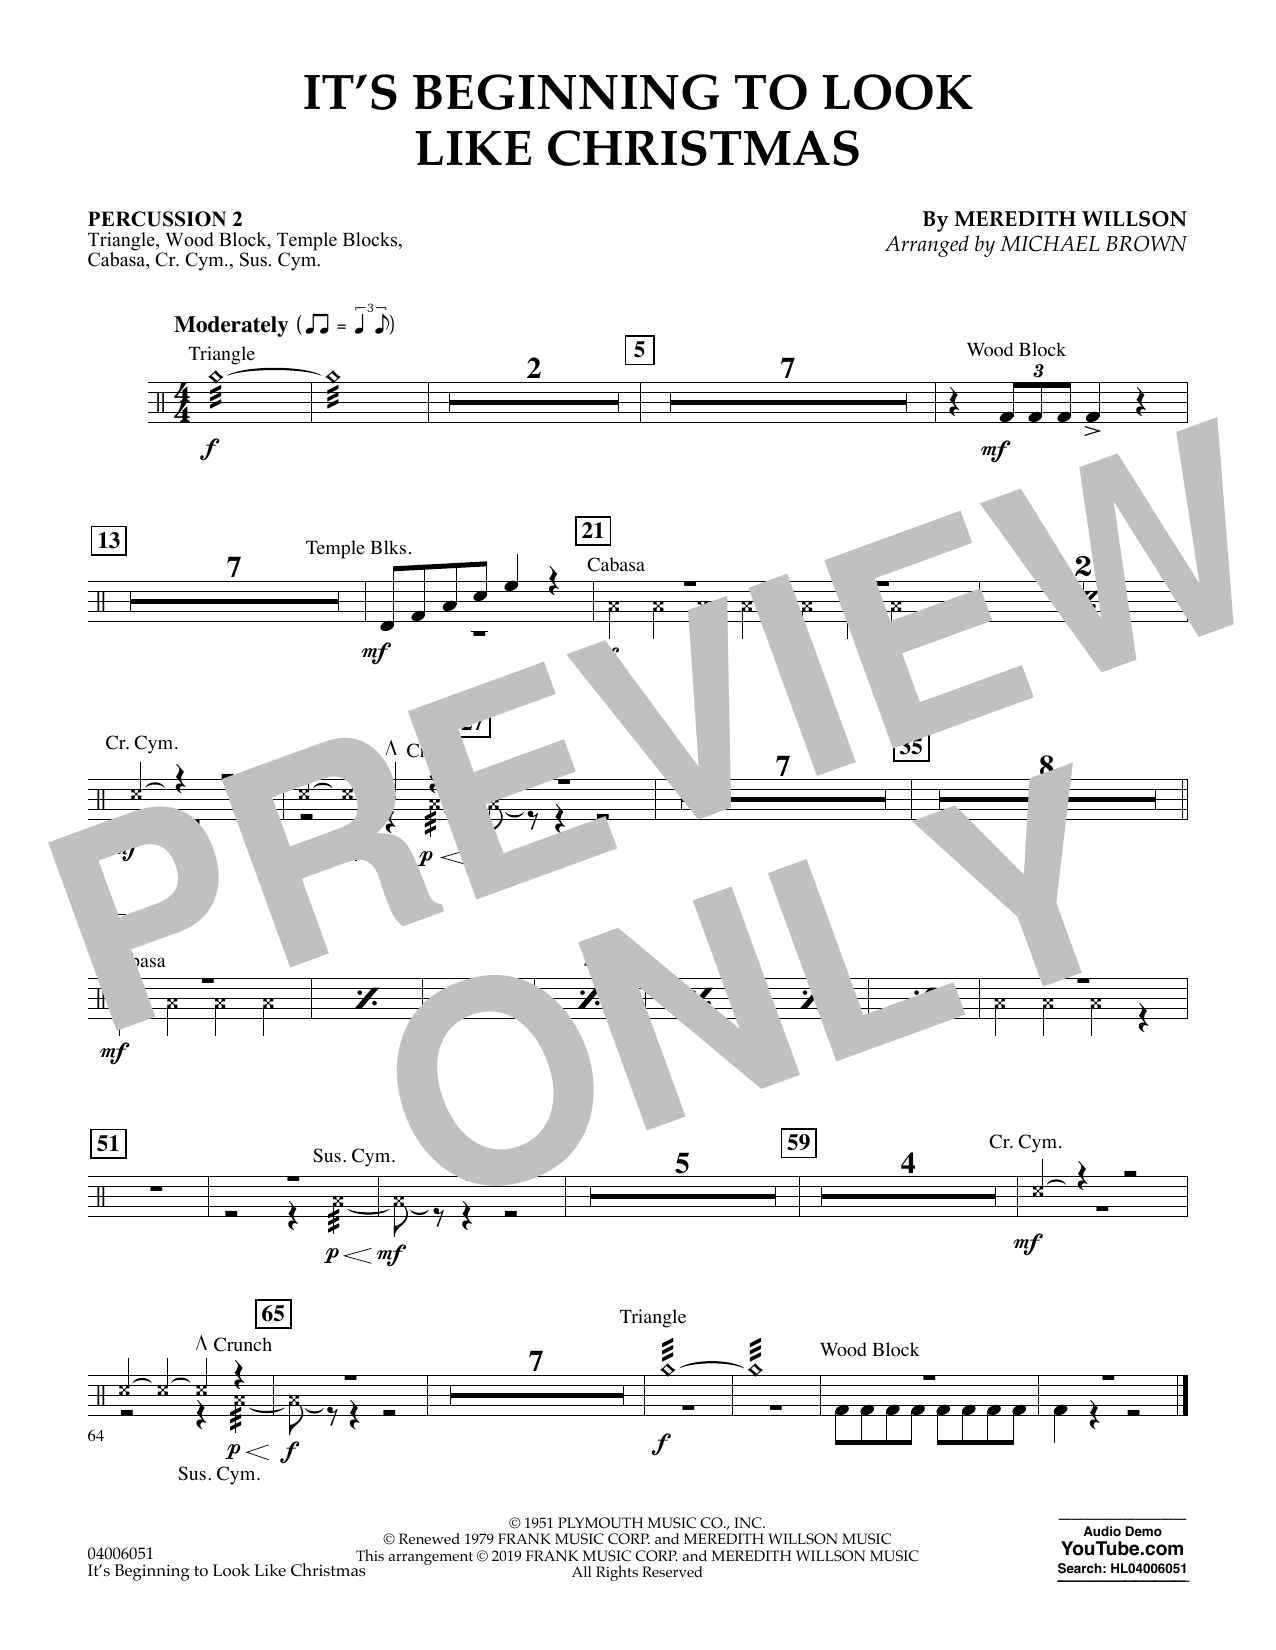 Meredith Willson It's Beginning to Look Like Christmas (arr. Michael Brown) - Percussion 2 sheet music preview music notes and score for Concert Band including 1 page(s)